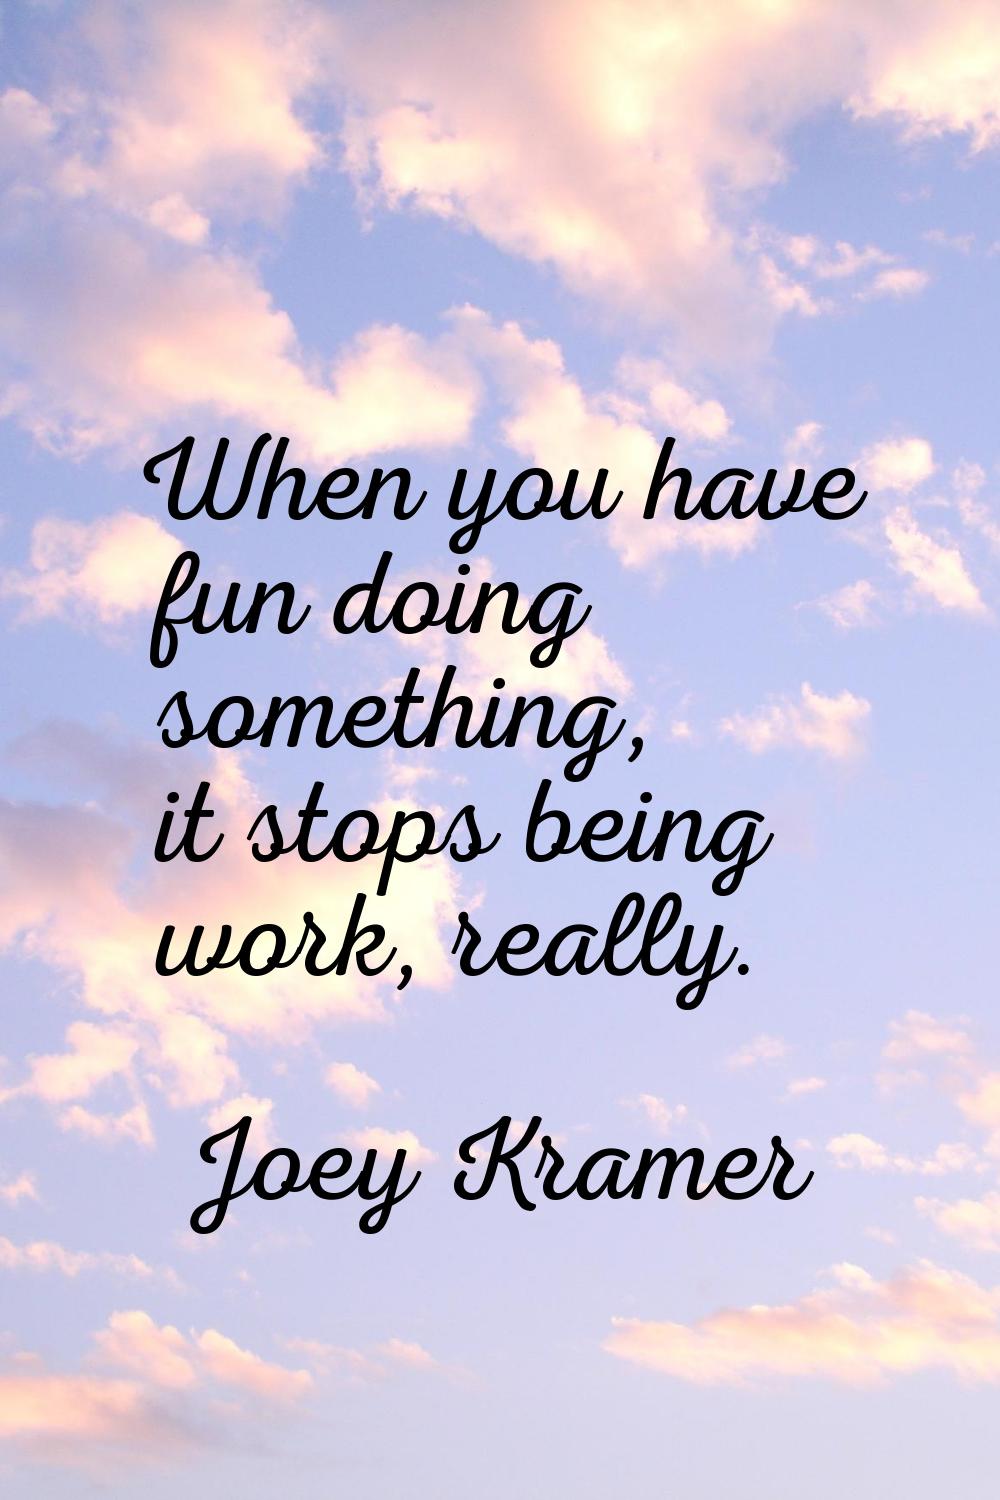 When you have fun doing something, it stops being work, really.